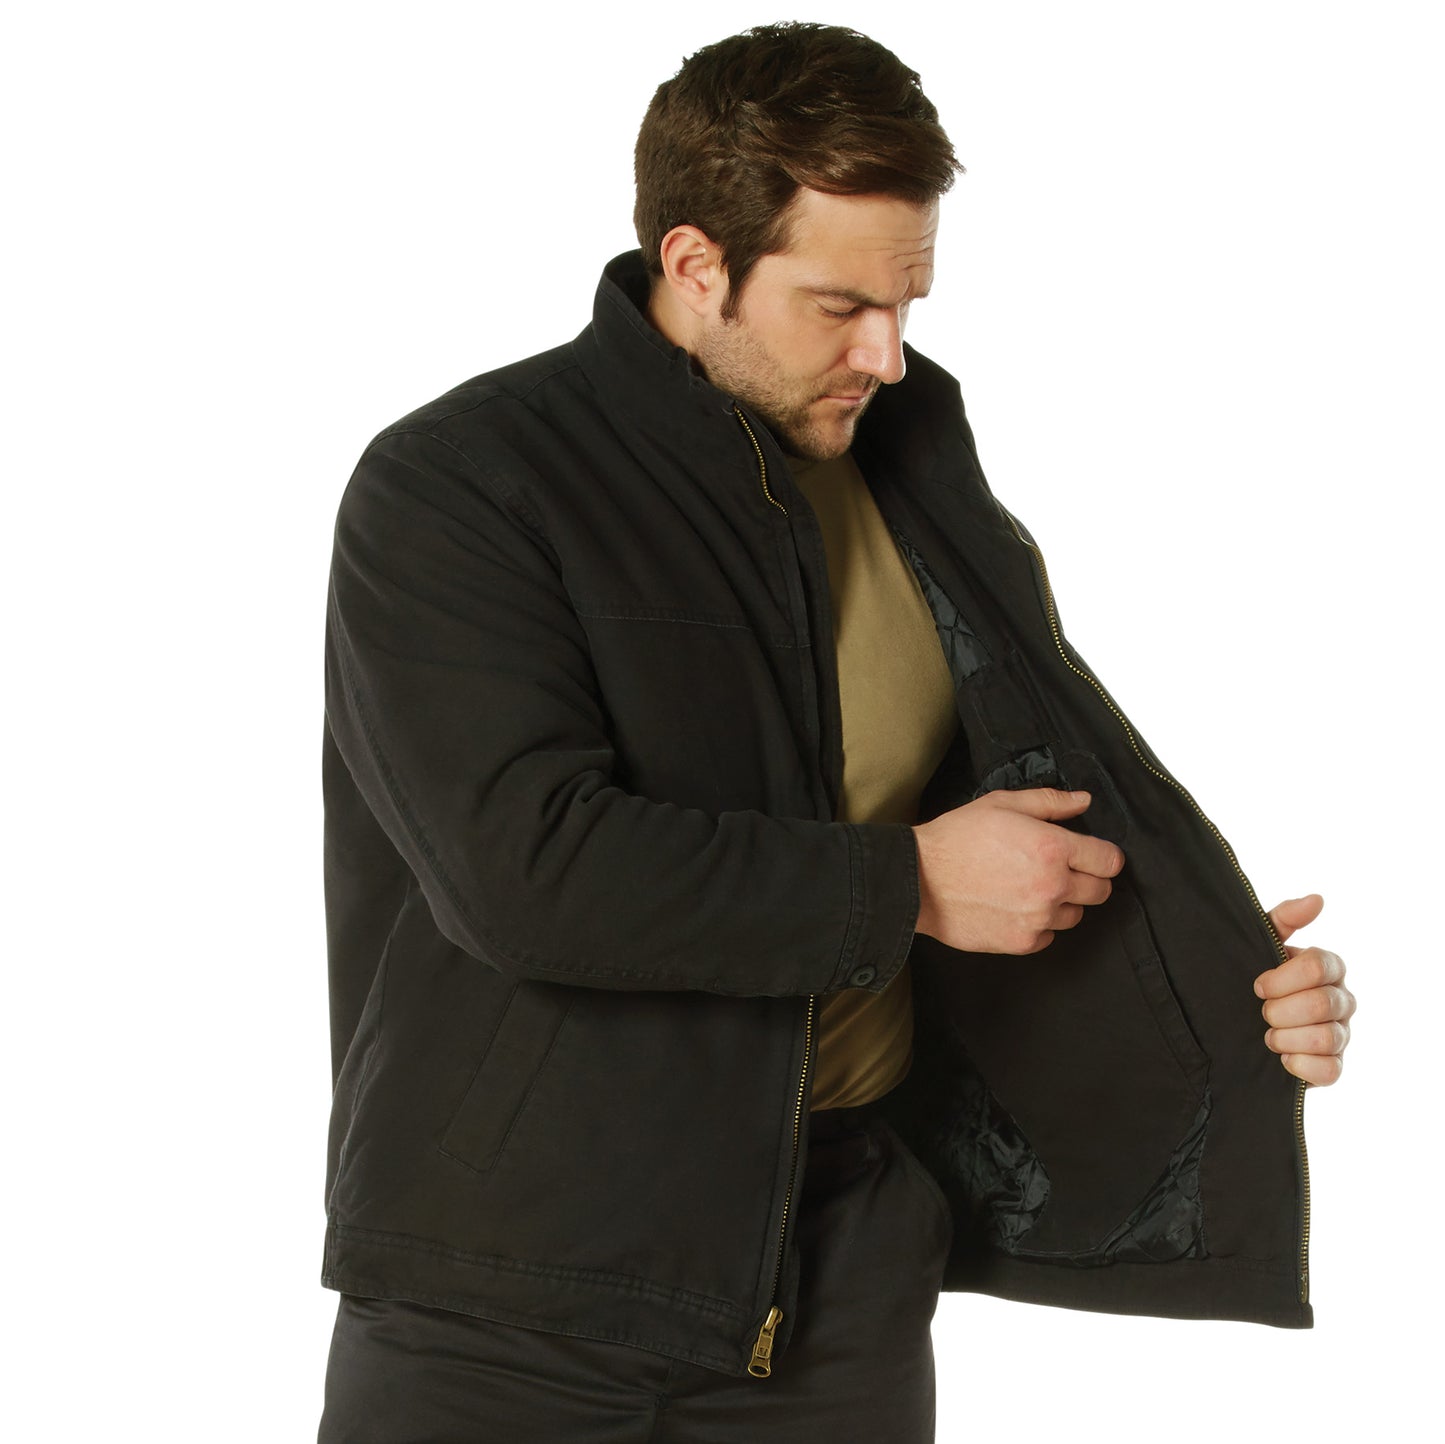 Rothco Concealed Carry 3 Season Jacket